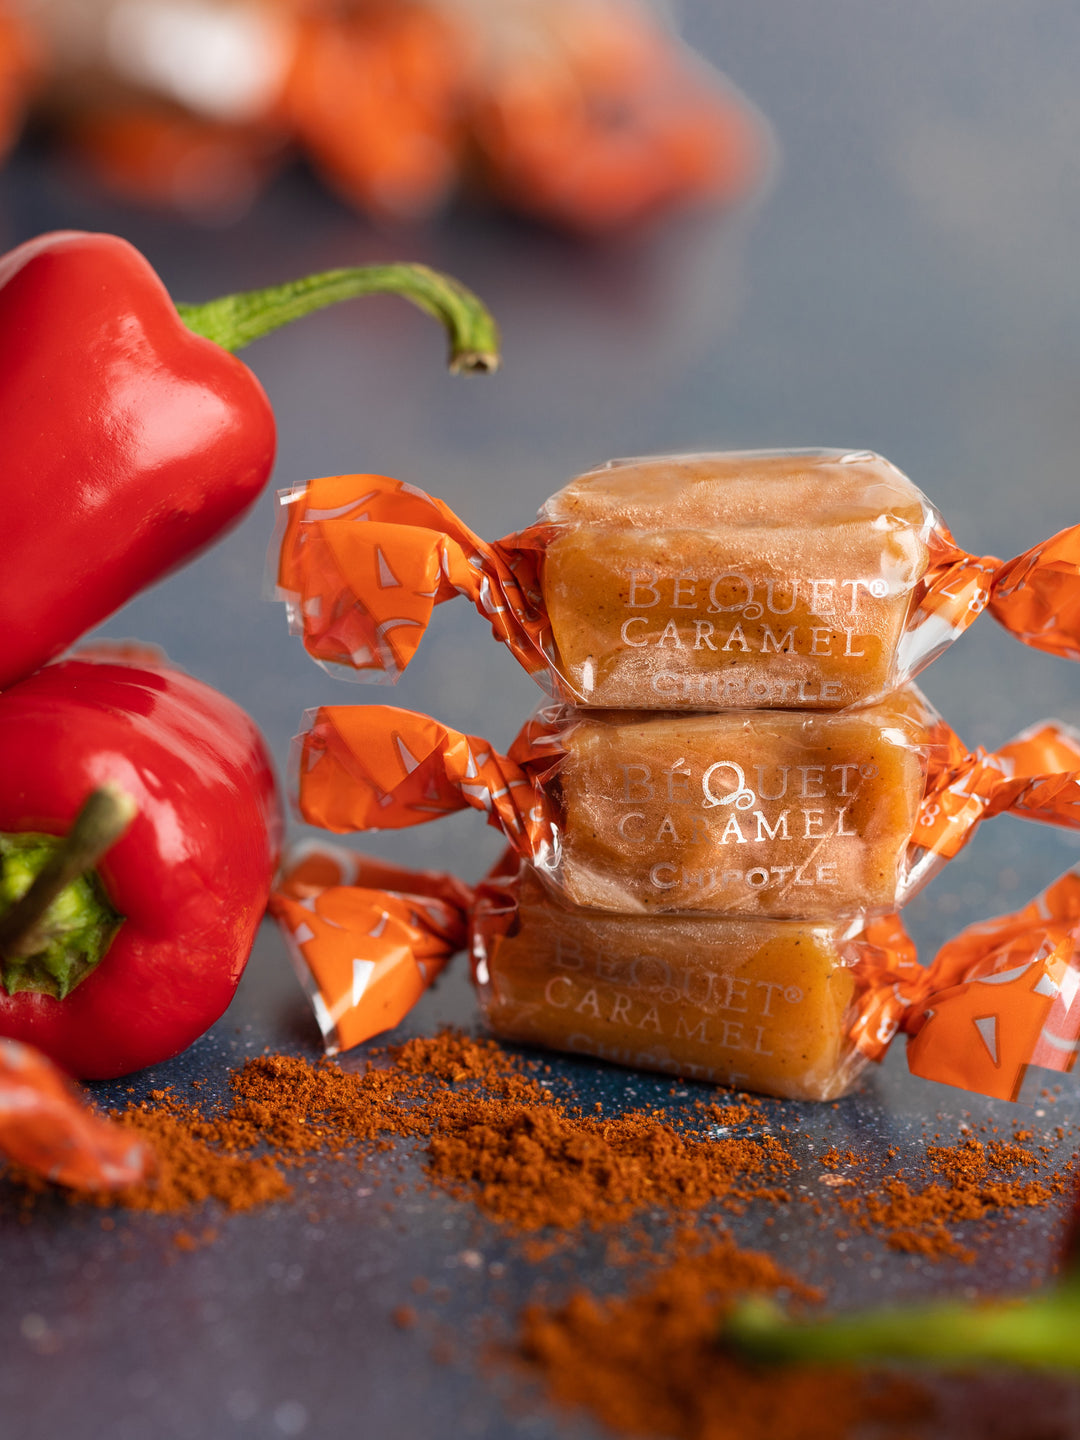 chipotle bequet caramel#caramel-variety_chipotle